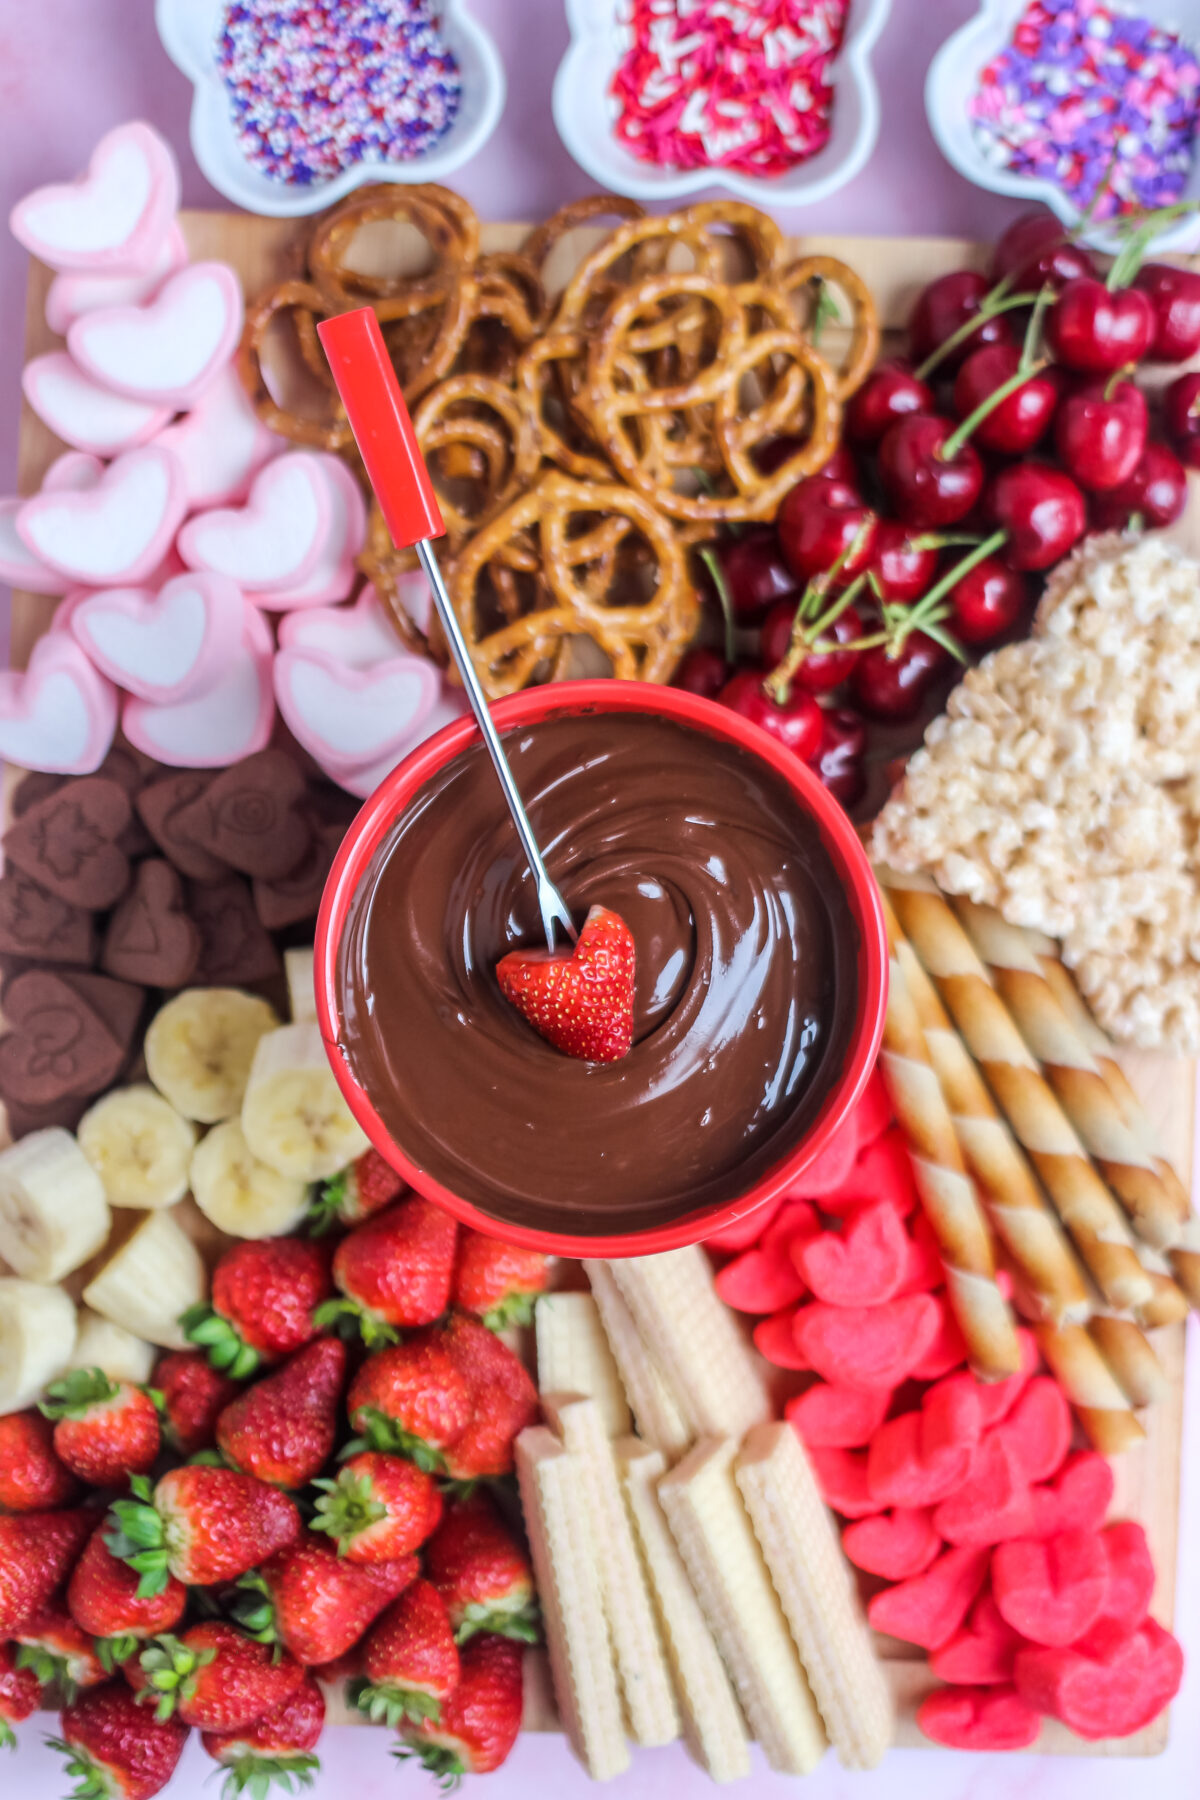 Looking for a fun and easy way to celebrate Valentine's Day? Try this delicious Valentine's day chocolate fondue board!